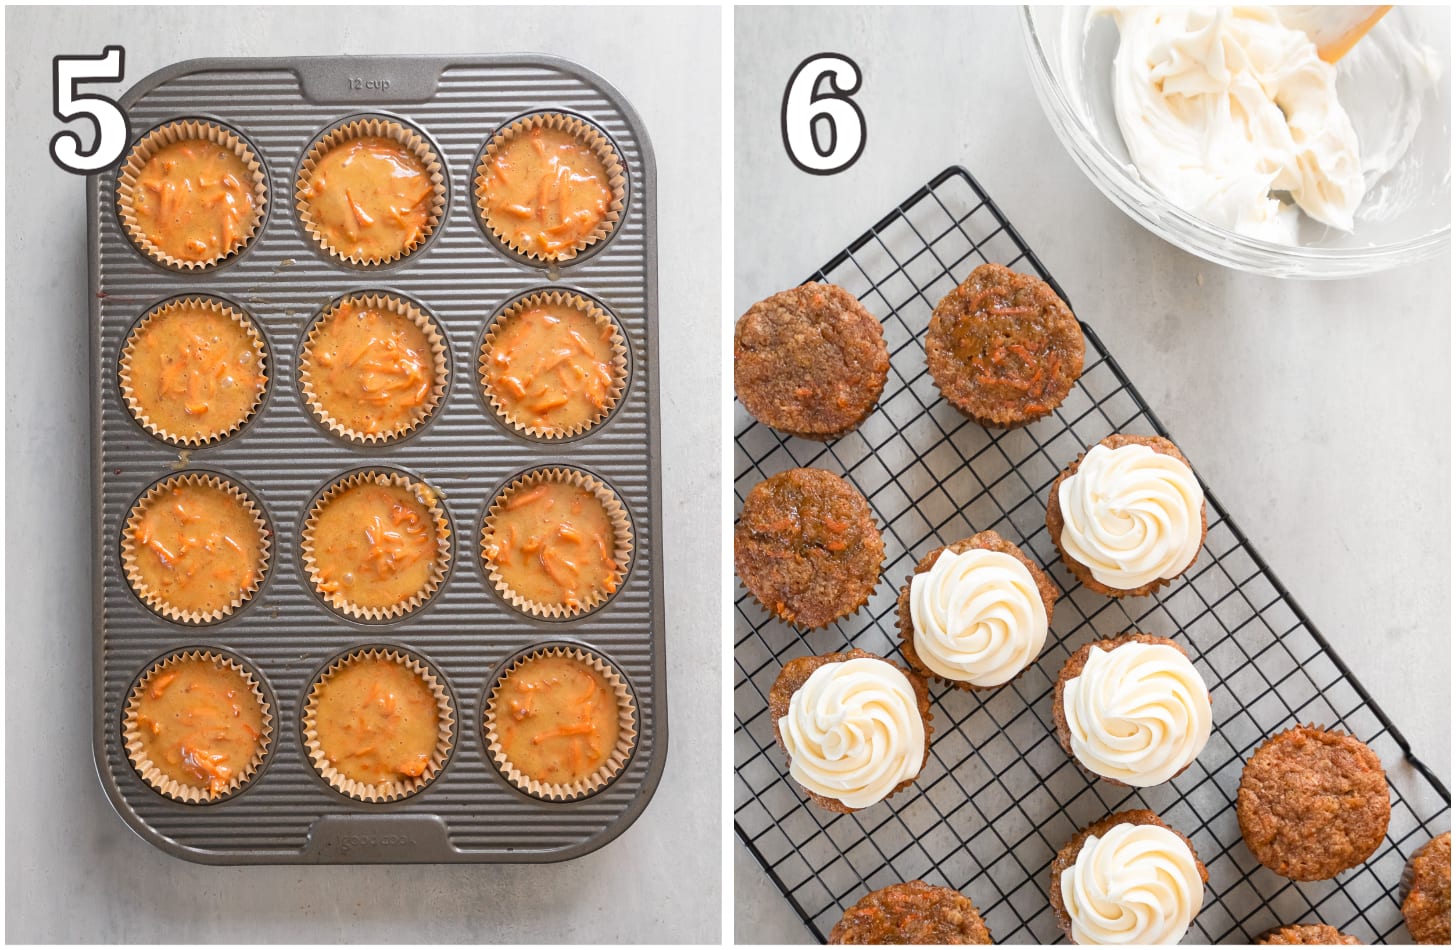 two photo collage showing carrot cake cupcakes before and after baking with cream cheese frosting.